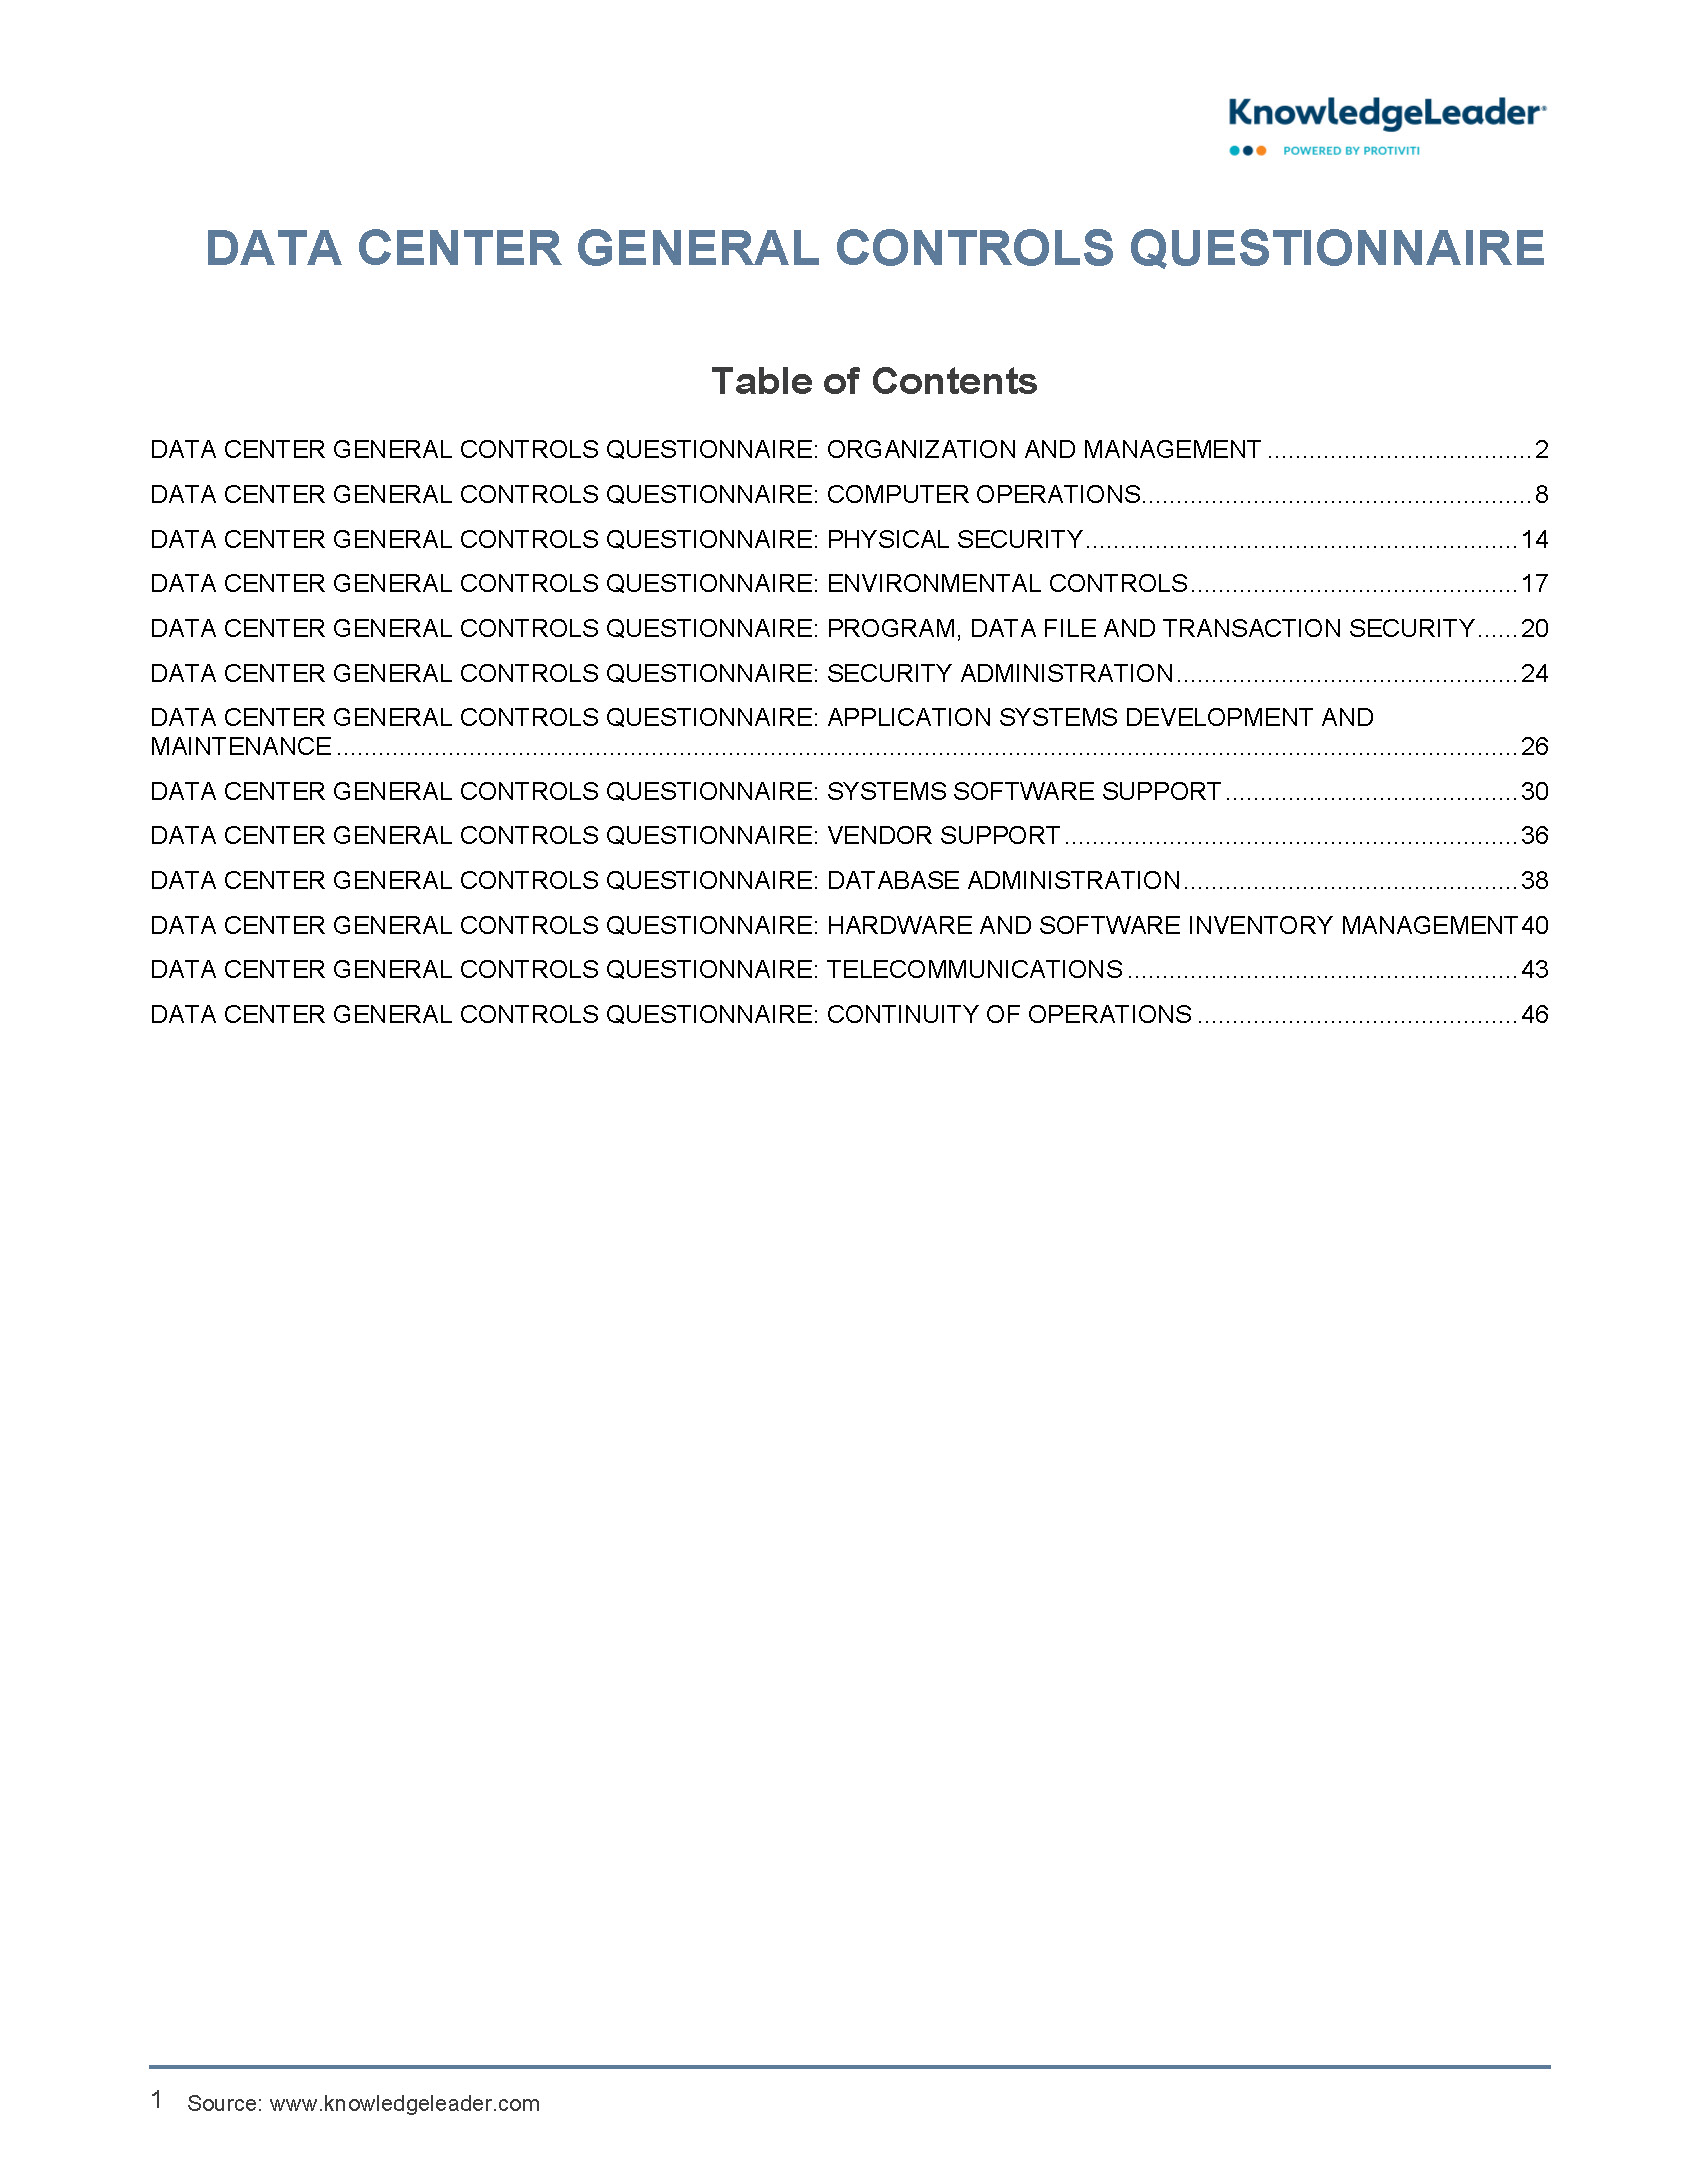 Screenshot of the first page of Data Center General Controls Questionnaire